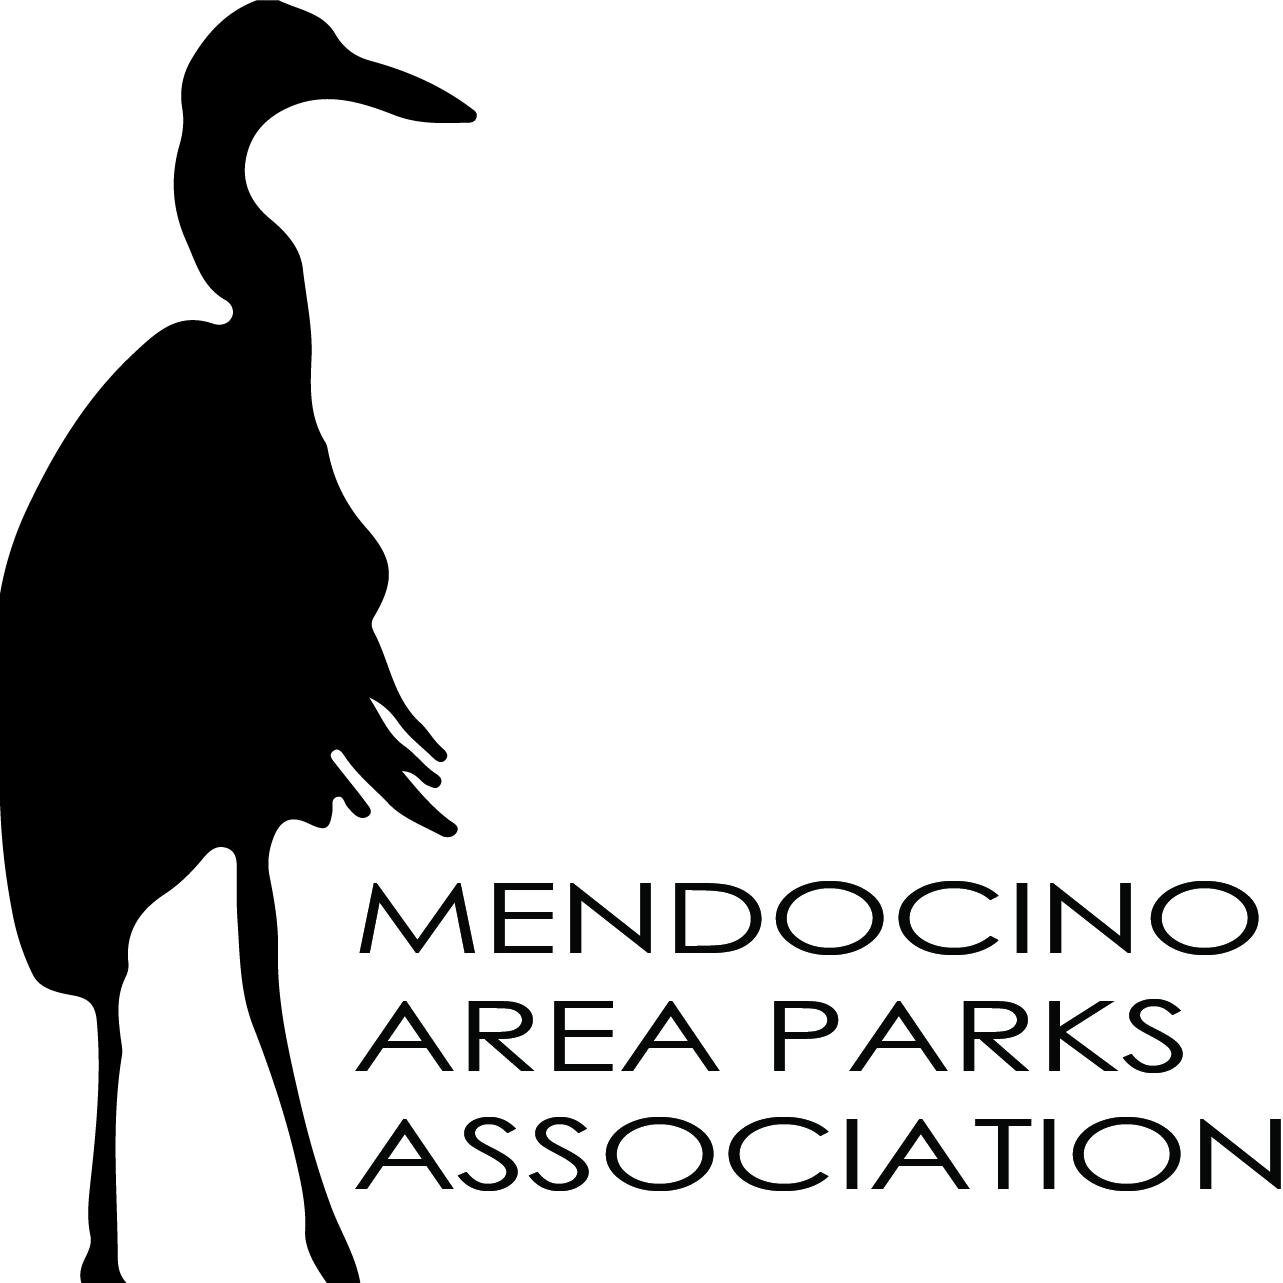 MAPA Mission Statement: “To inspire wonder, discovery and responsibility for our natural and cultural treasures in Mendocino County.”